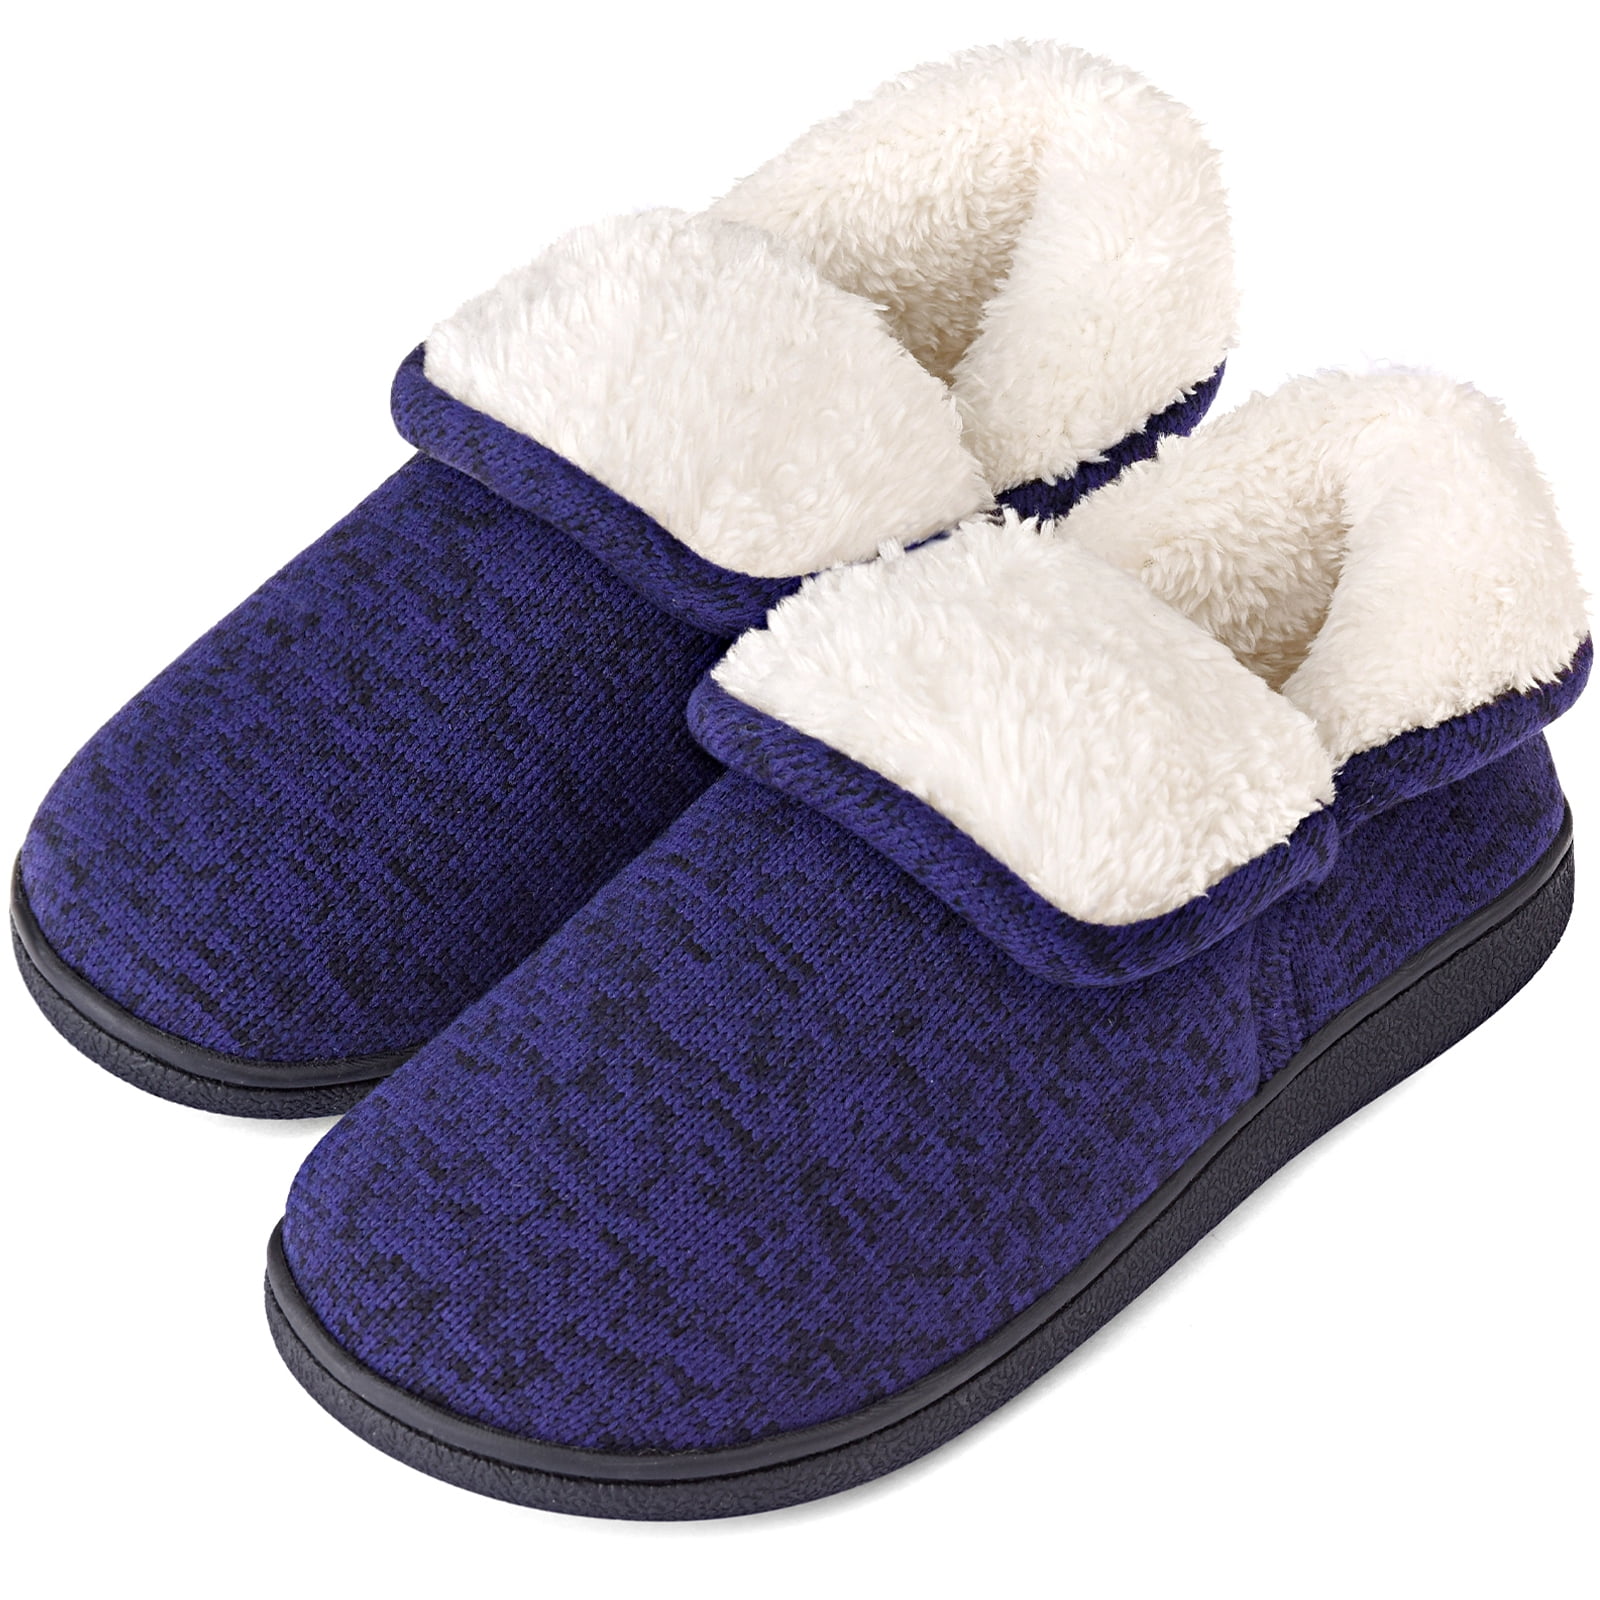 ofoot Womens Winter Warm Moccasins Plush Slippers Indoor Slip On Shoes With Soft Comfortable Fluffy Fur Lining